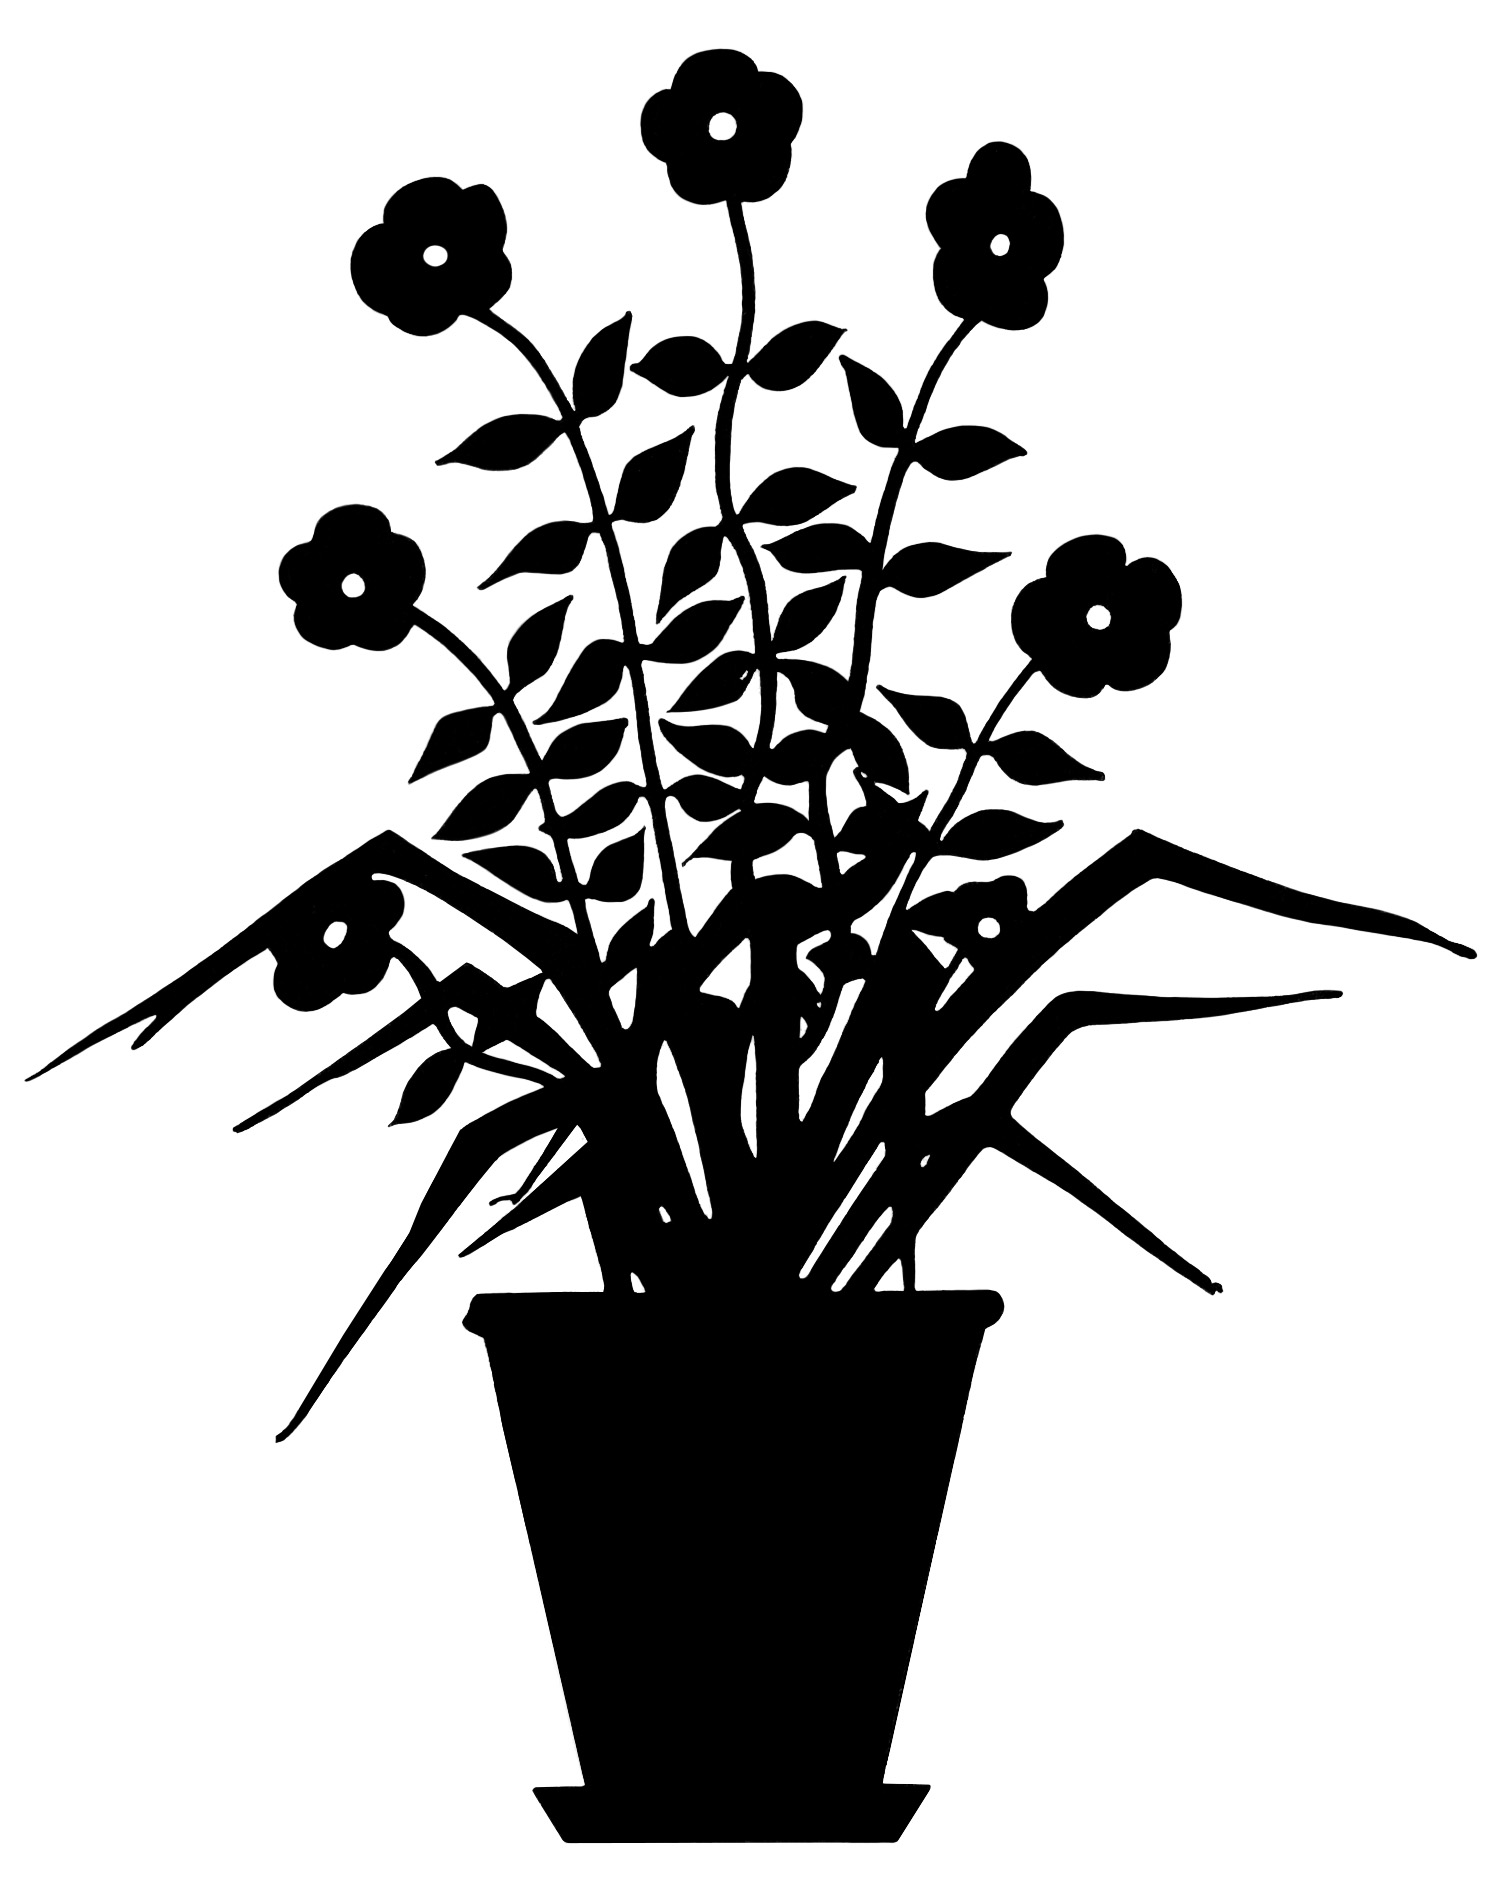 vintage flower clip art, flowering plant silhouette, black and white graphic, plant in pot illustration, floral silhouette clipart image